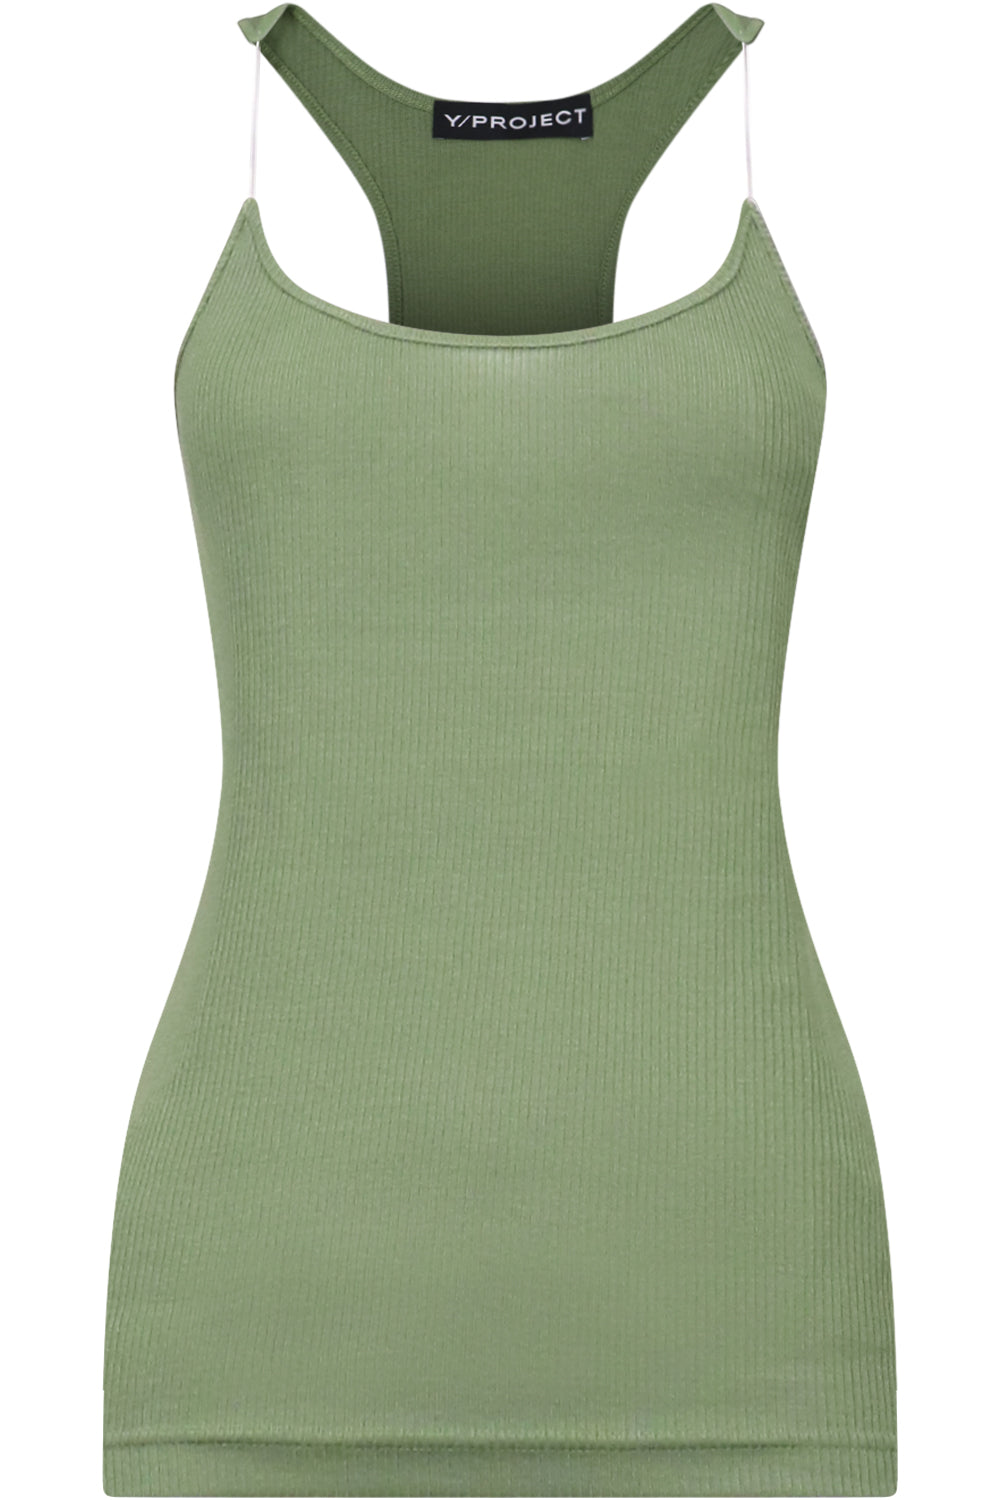 Y/PROJECT RTW INVISIBLE STRAP TANK TOP | OLIVE